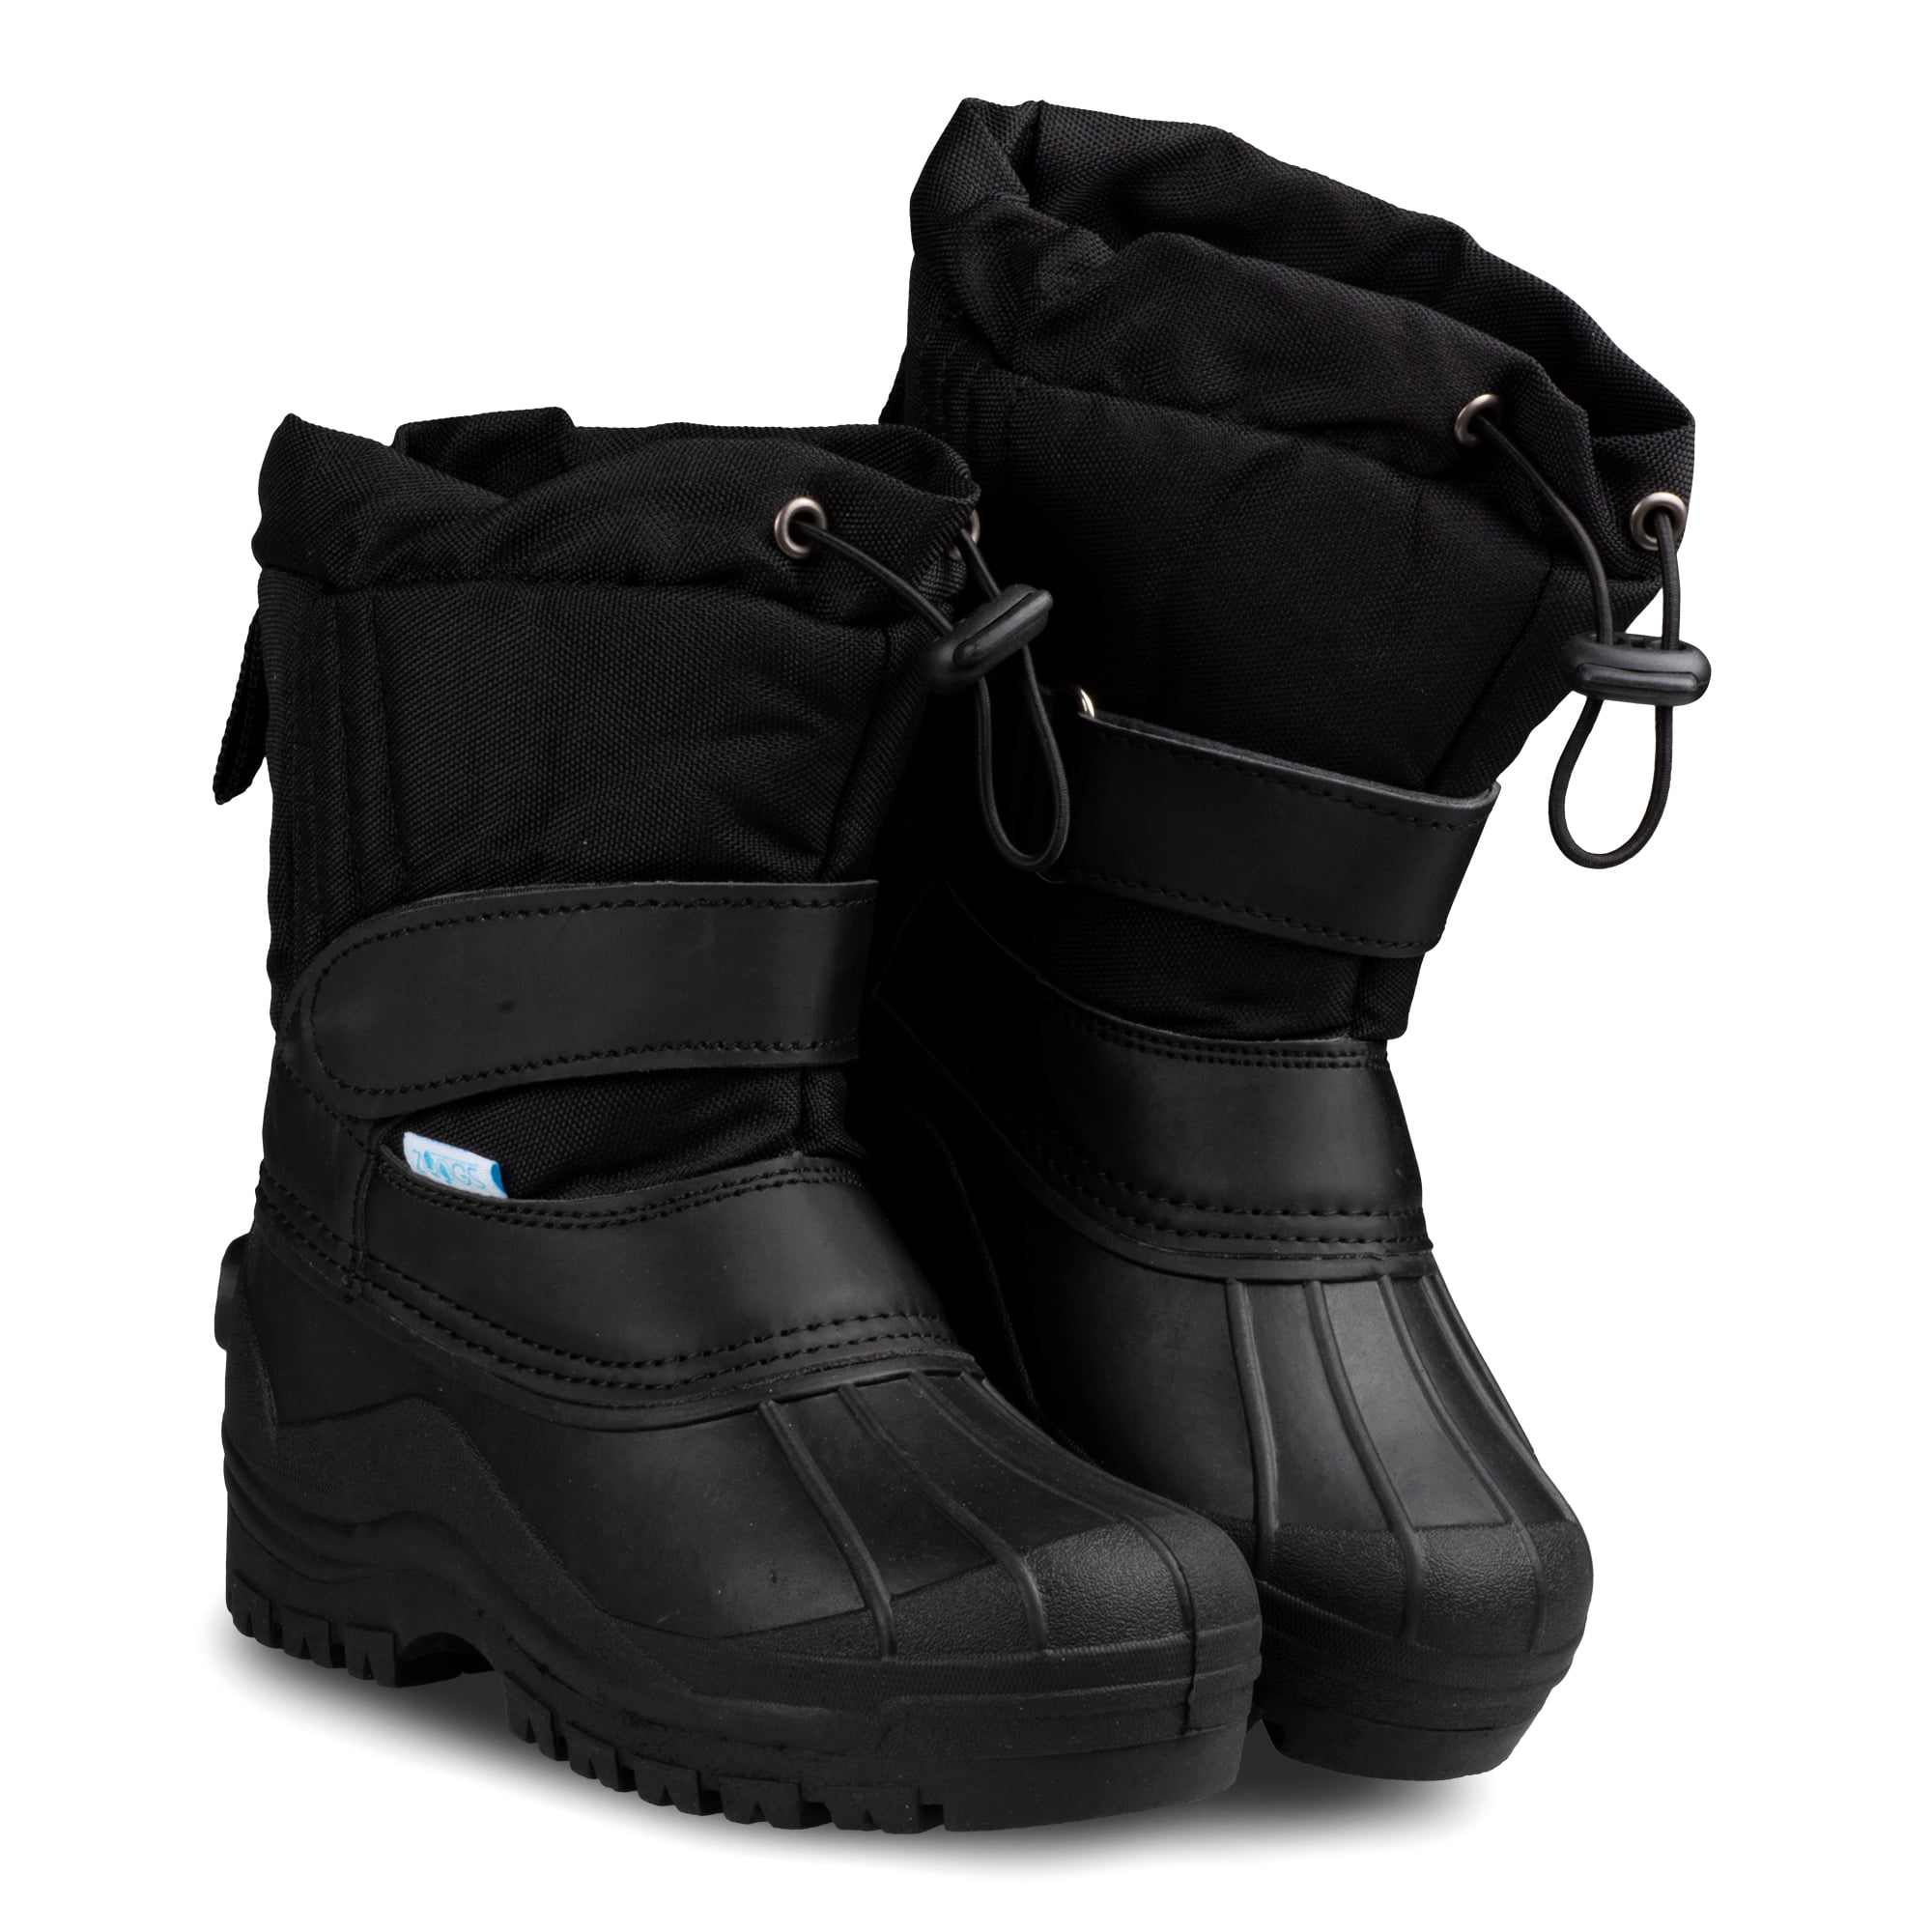 ZOOGS Kids Snow Boots for Toddlers and Girls Boys 